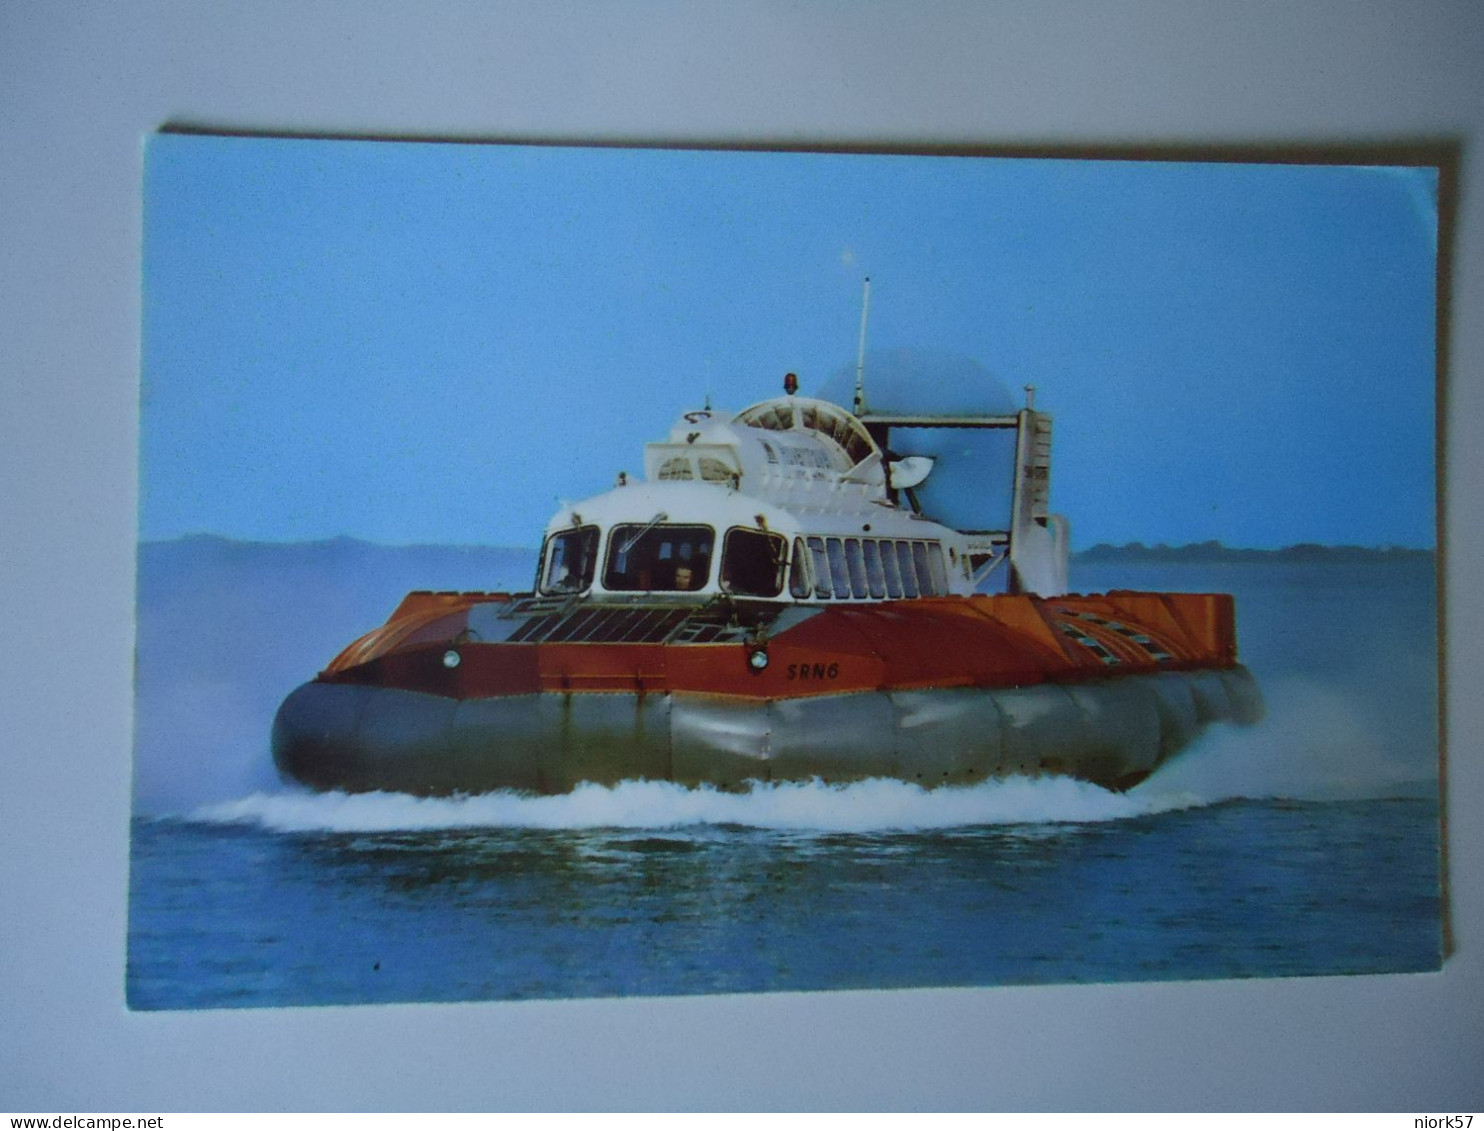 NORWAY POSTCARDS SHIPS   SRN 6 HOVERCRAFT   FOR MORE PURCHASES 10% DISCOUNT - Norway